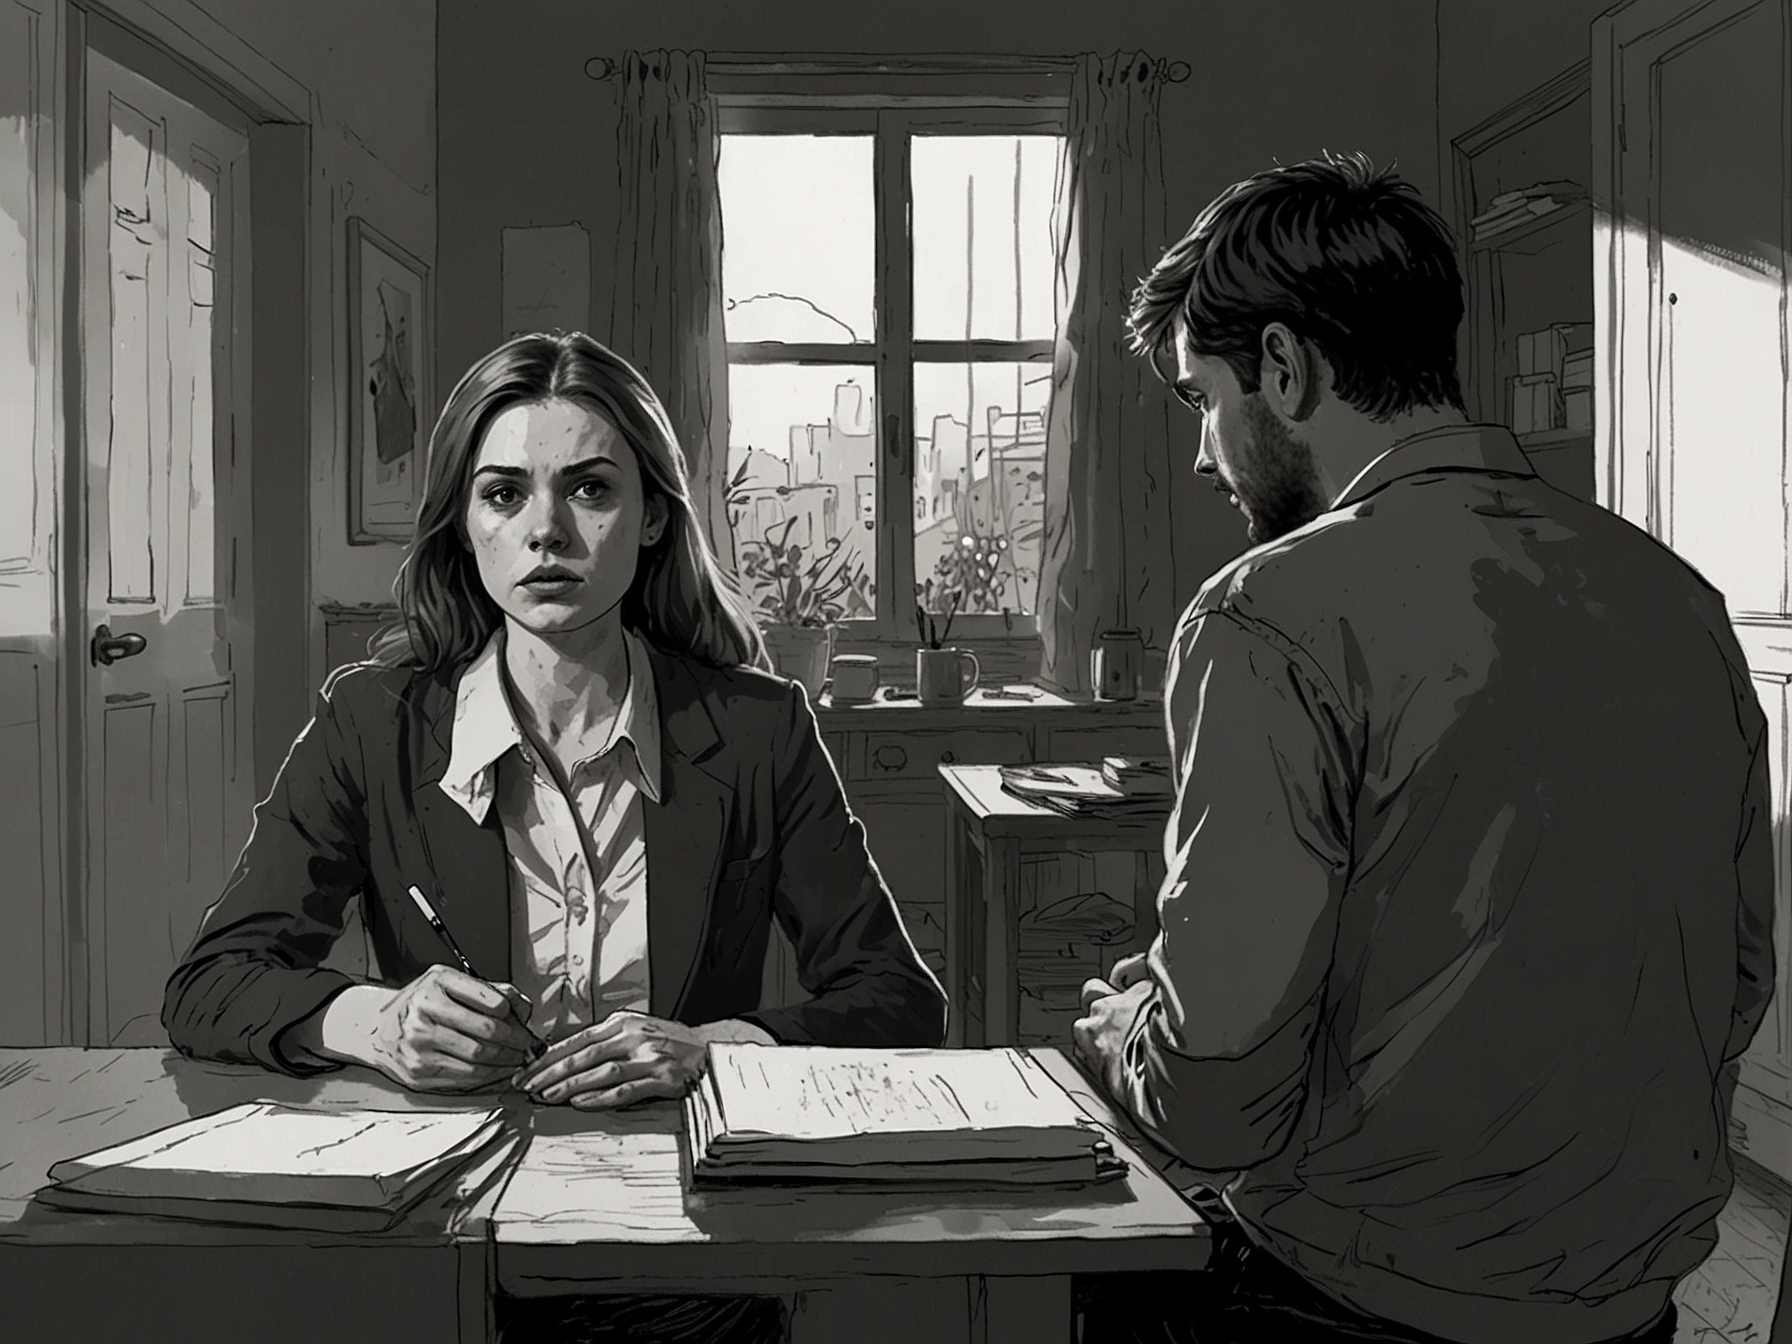 A tense moment from the show depicting a victim recounting their terrifying experience with a manipulative and dangerous roommate, highlighting the raw emotional impact of the trauma endured.